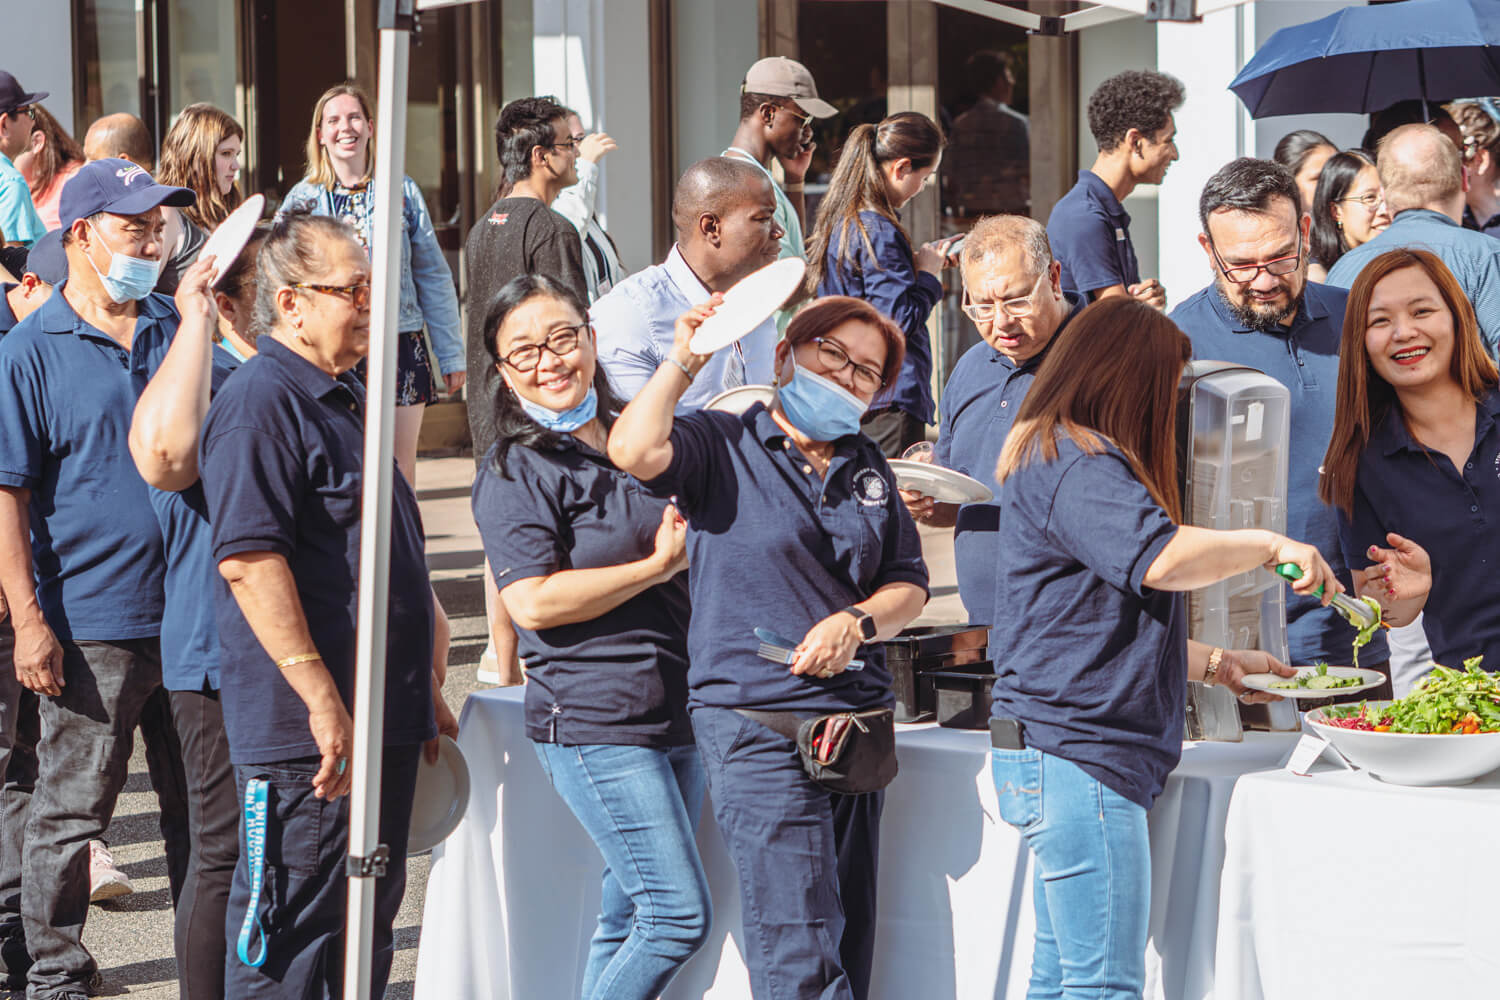 A group of SHCS staff wearing navy blue SHCS shirts in line for food at the 2022 SHCS Staff Appreciation BBQ